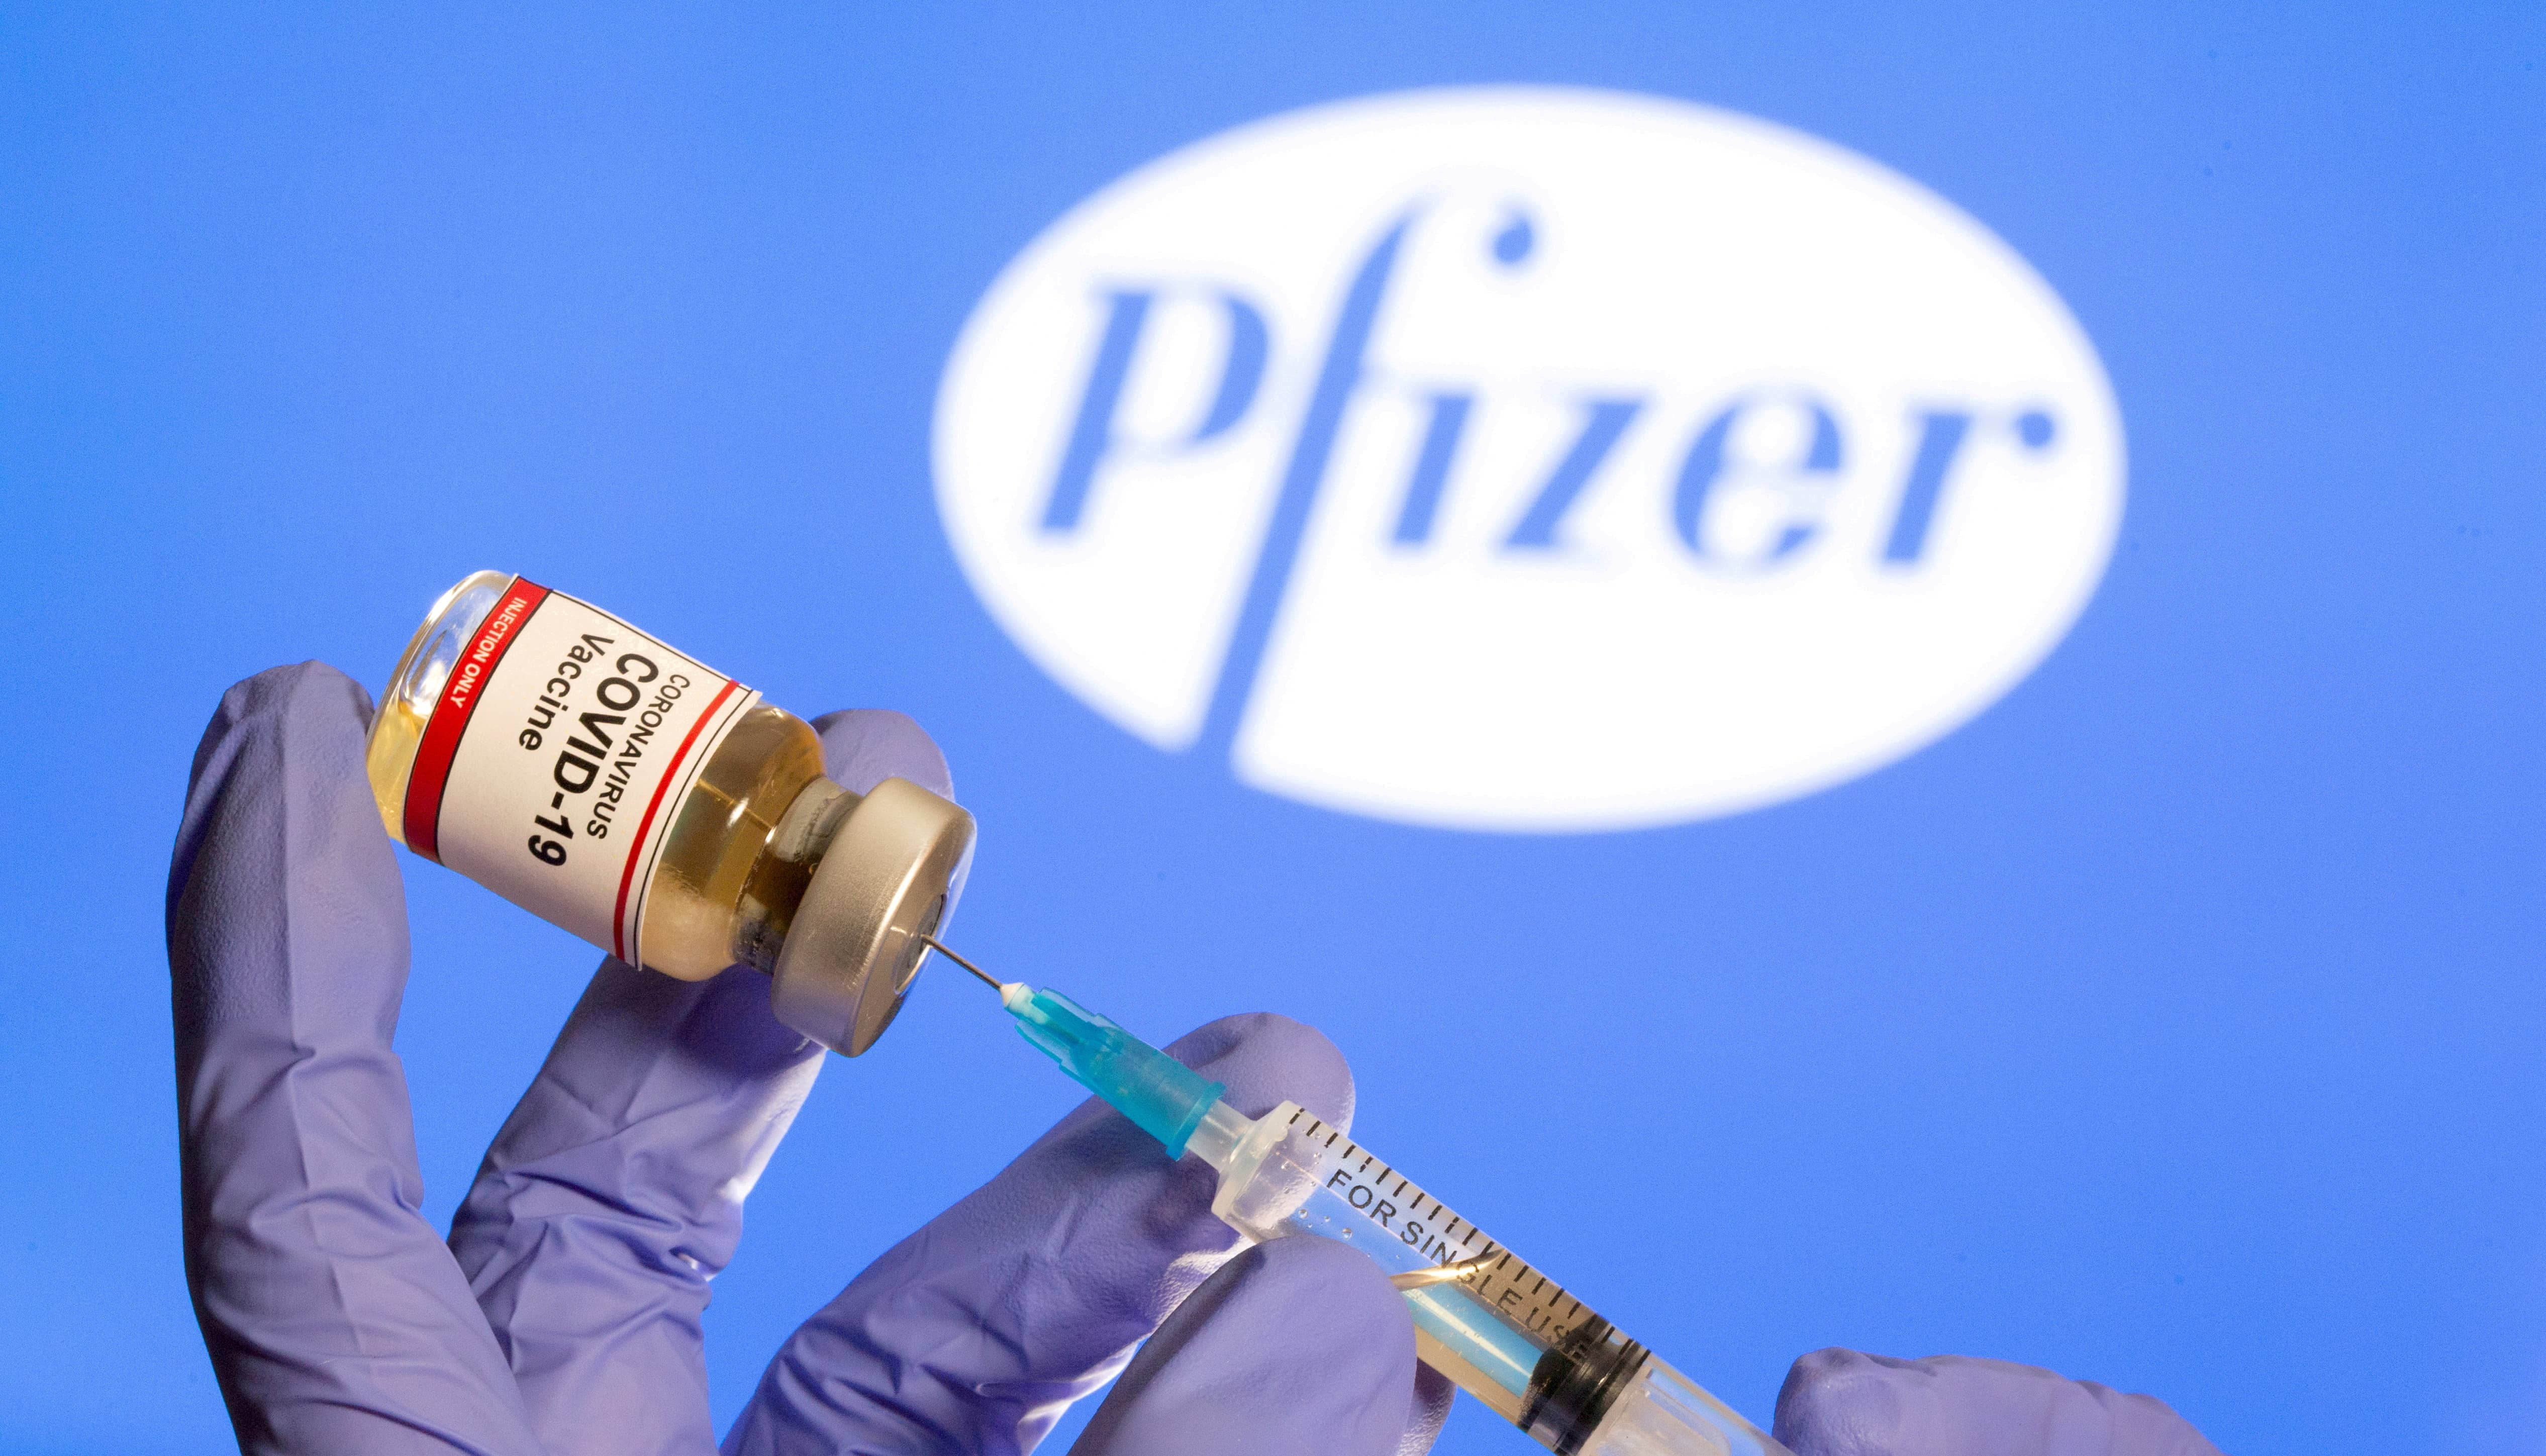 file-photo-file-photo-a-woman-holds-a-small-bottle-labeled-with-a-coronavirus-covid-19-vaccine-sticker-and-a-medical-syringe-in-front-of-displayed-pfizer-logo-in-this-illustration